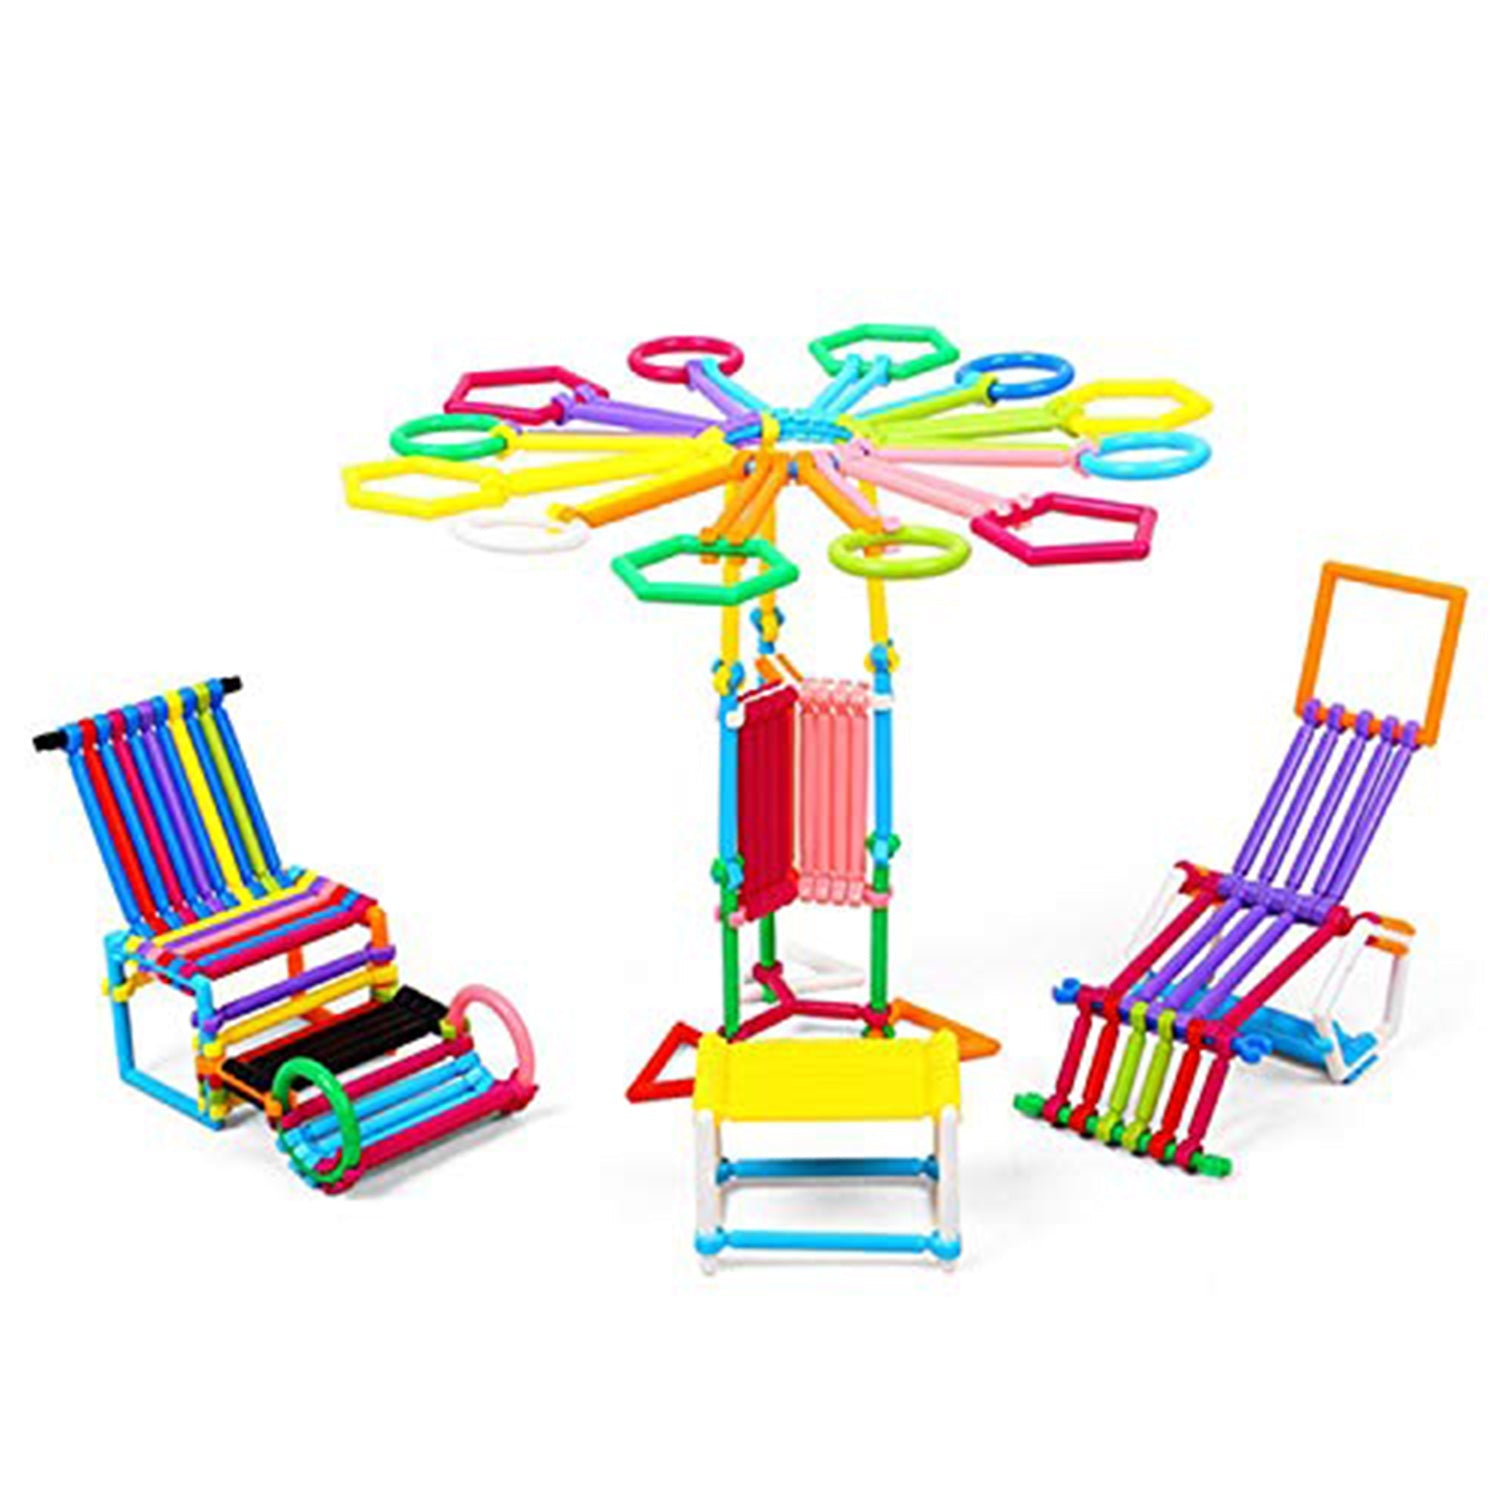 3905 400 Pc Sticks Blocks Toy used in all kinds of household and official places by kids and children's specially for playing and enjoying purposes.